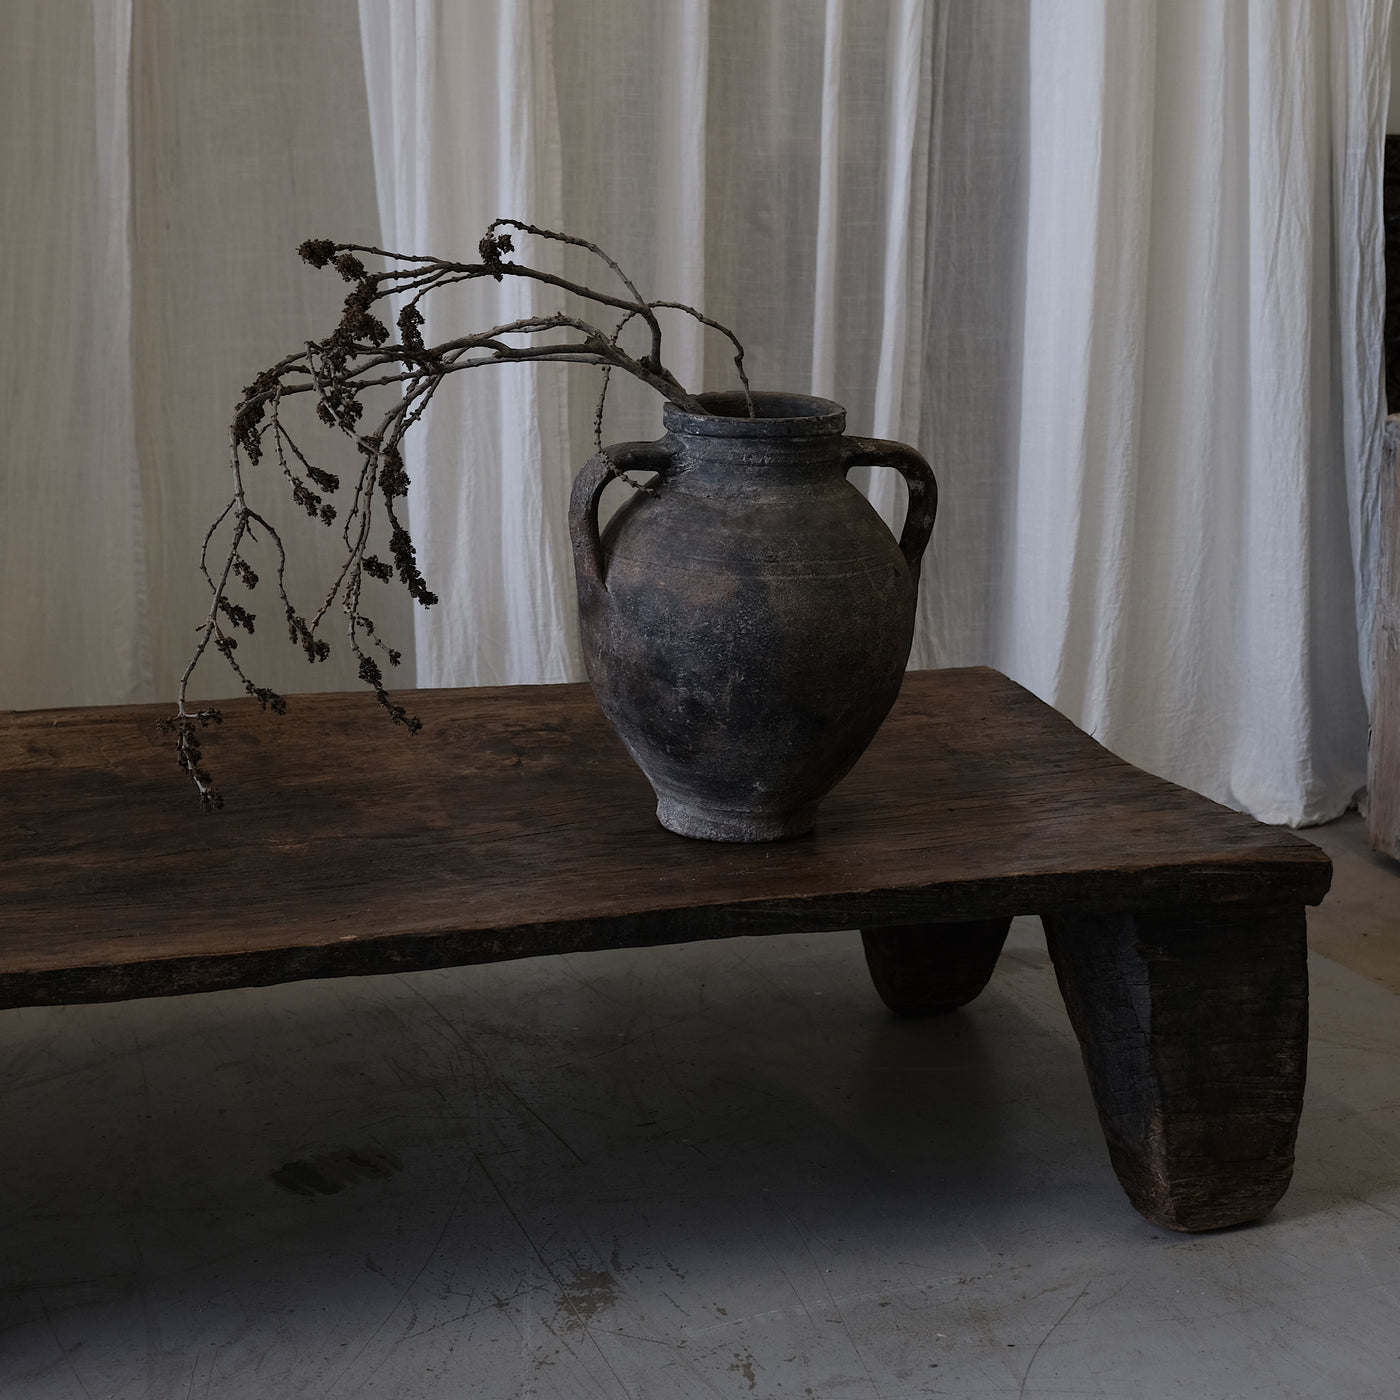 Authentic old naga table n ° 40